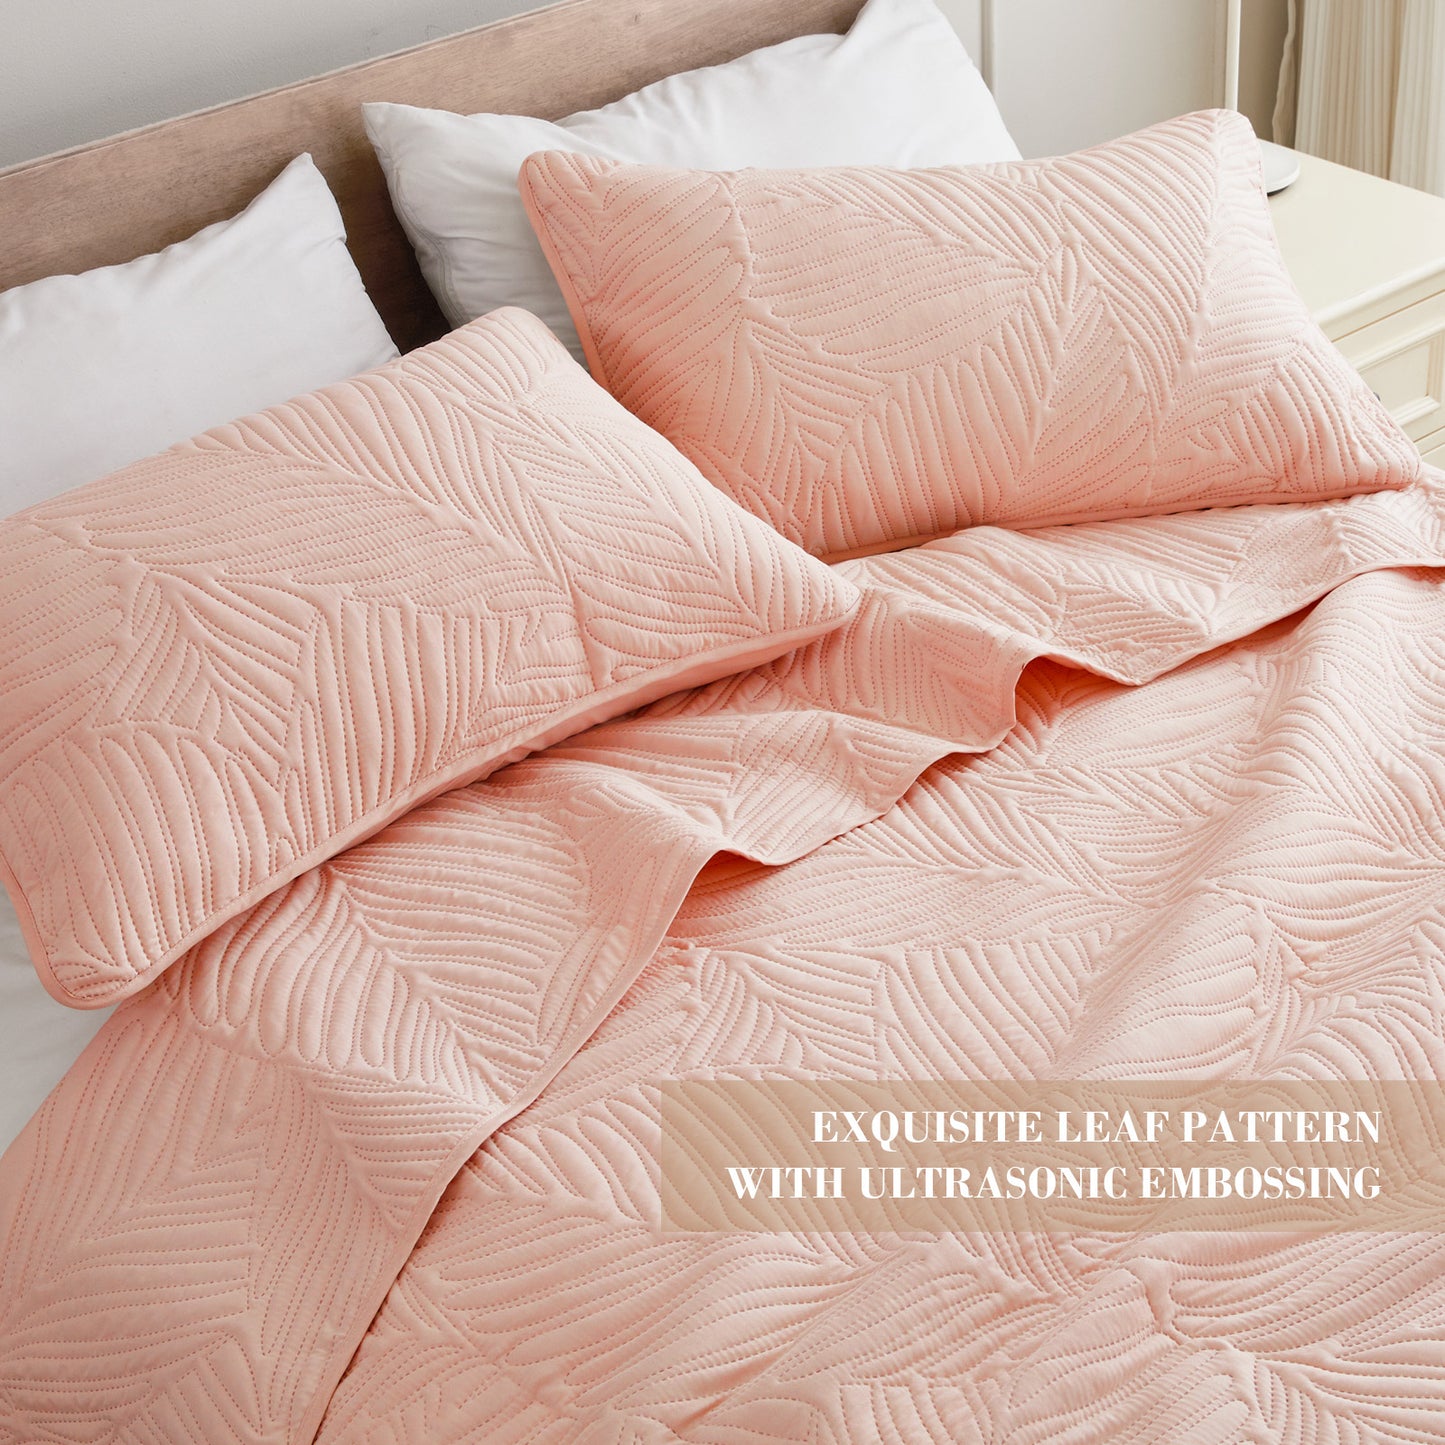 Exclusivo Mezcla Ultrasonic Twin Size Quilt Set Blush Pink, 2 Pieces Lightweight Bedspread Leaf Pattern Bed Cover Soft Microfiber Coverlet Bedding Set for All Seasons